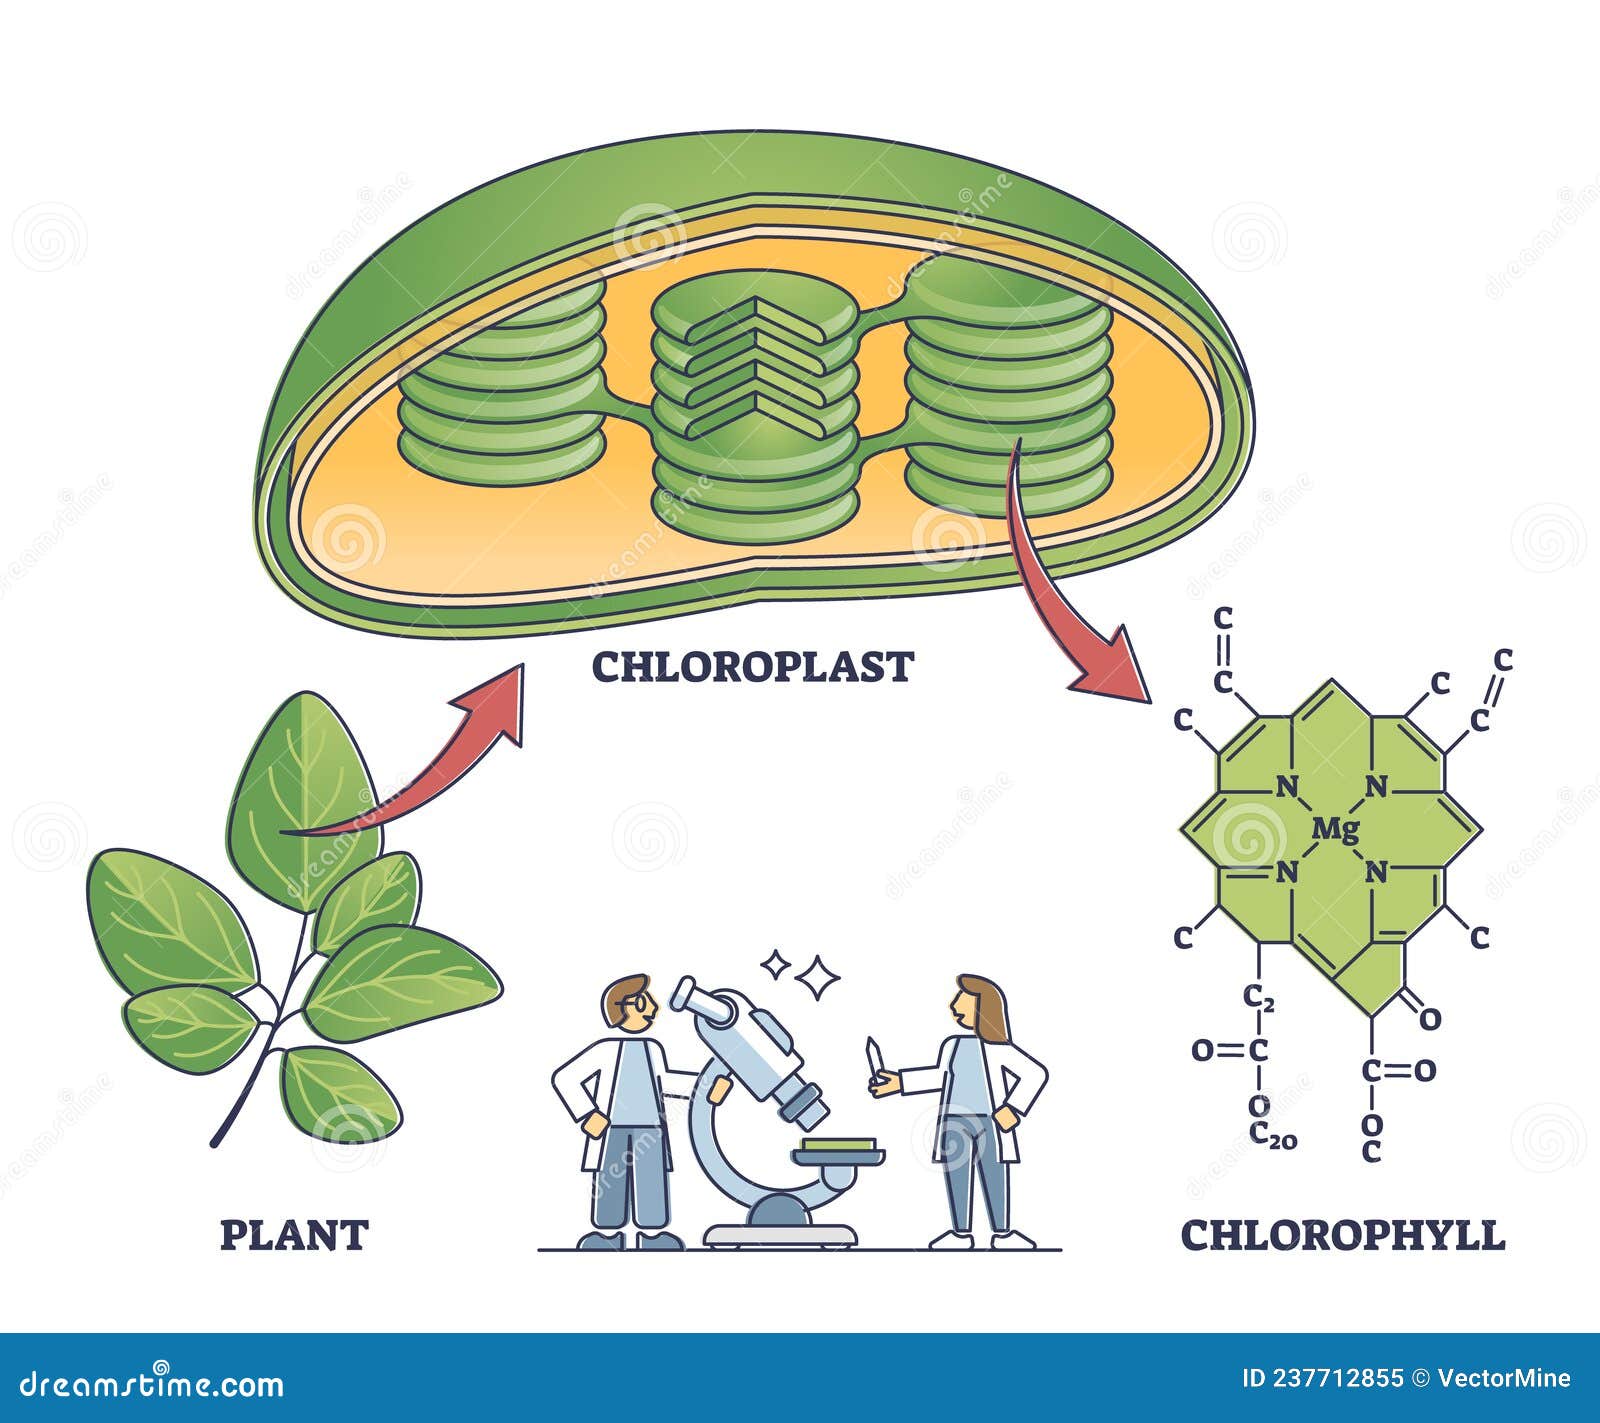 chlorophyll and chloroplast from plant to chemical formula outline diagram.